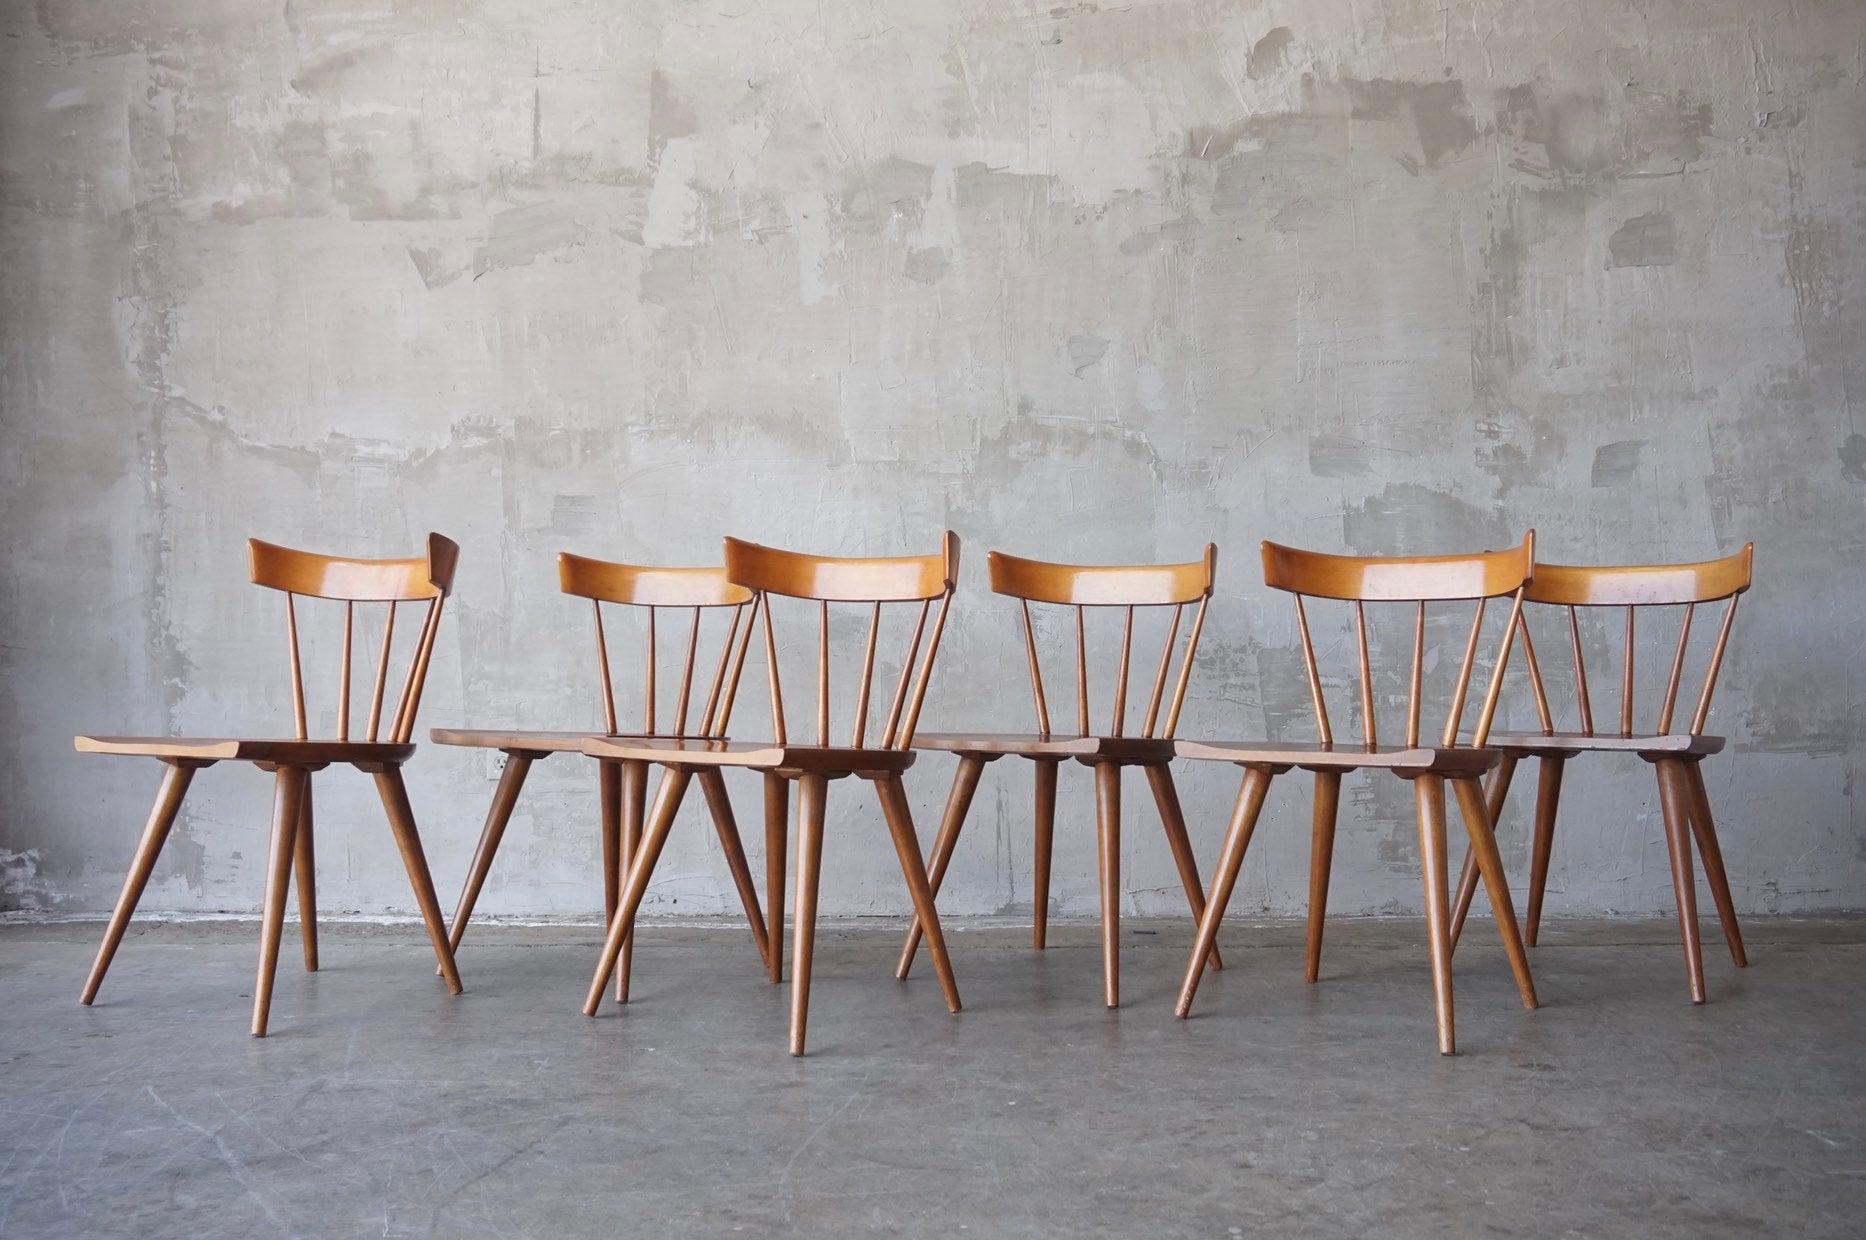 Beautiful set of 6 dining or side chairs, in solid maple, by Paul McCobb for Winchendon, circa 1950. 

This set is in very good original condition. Much less than typical wear than to be expected with age. Typical light scuffs to legs and seat